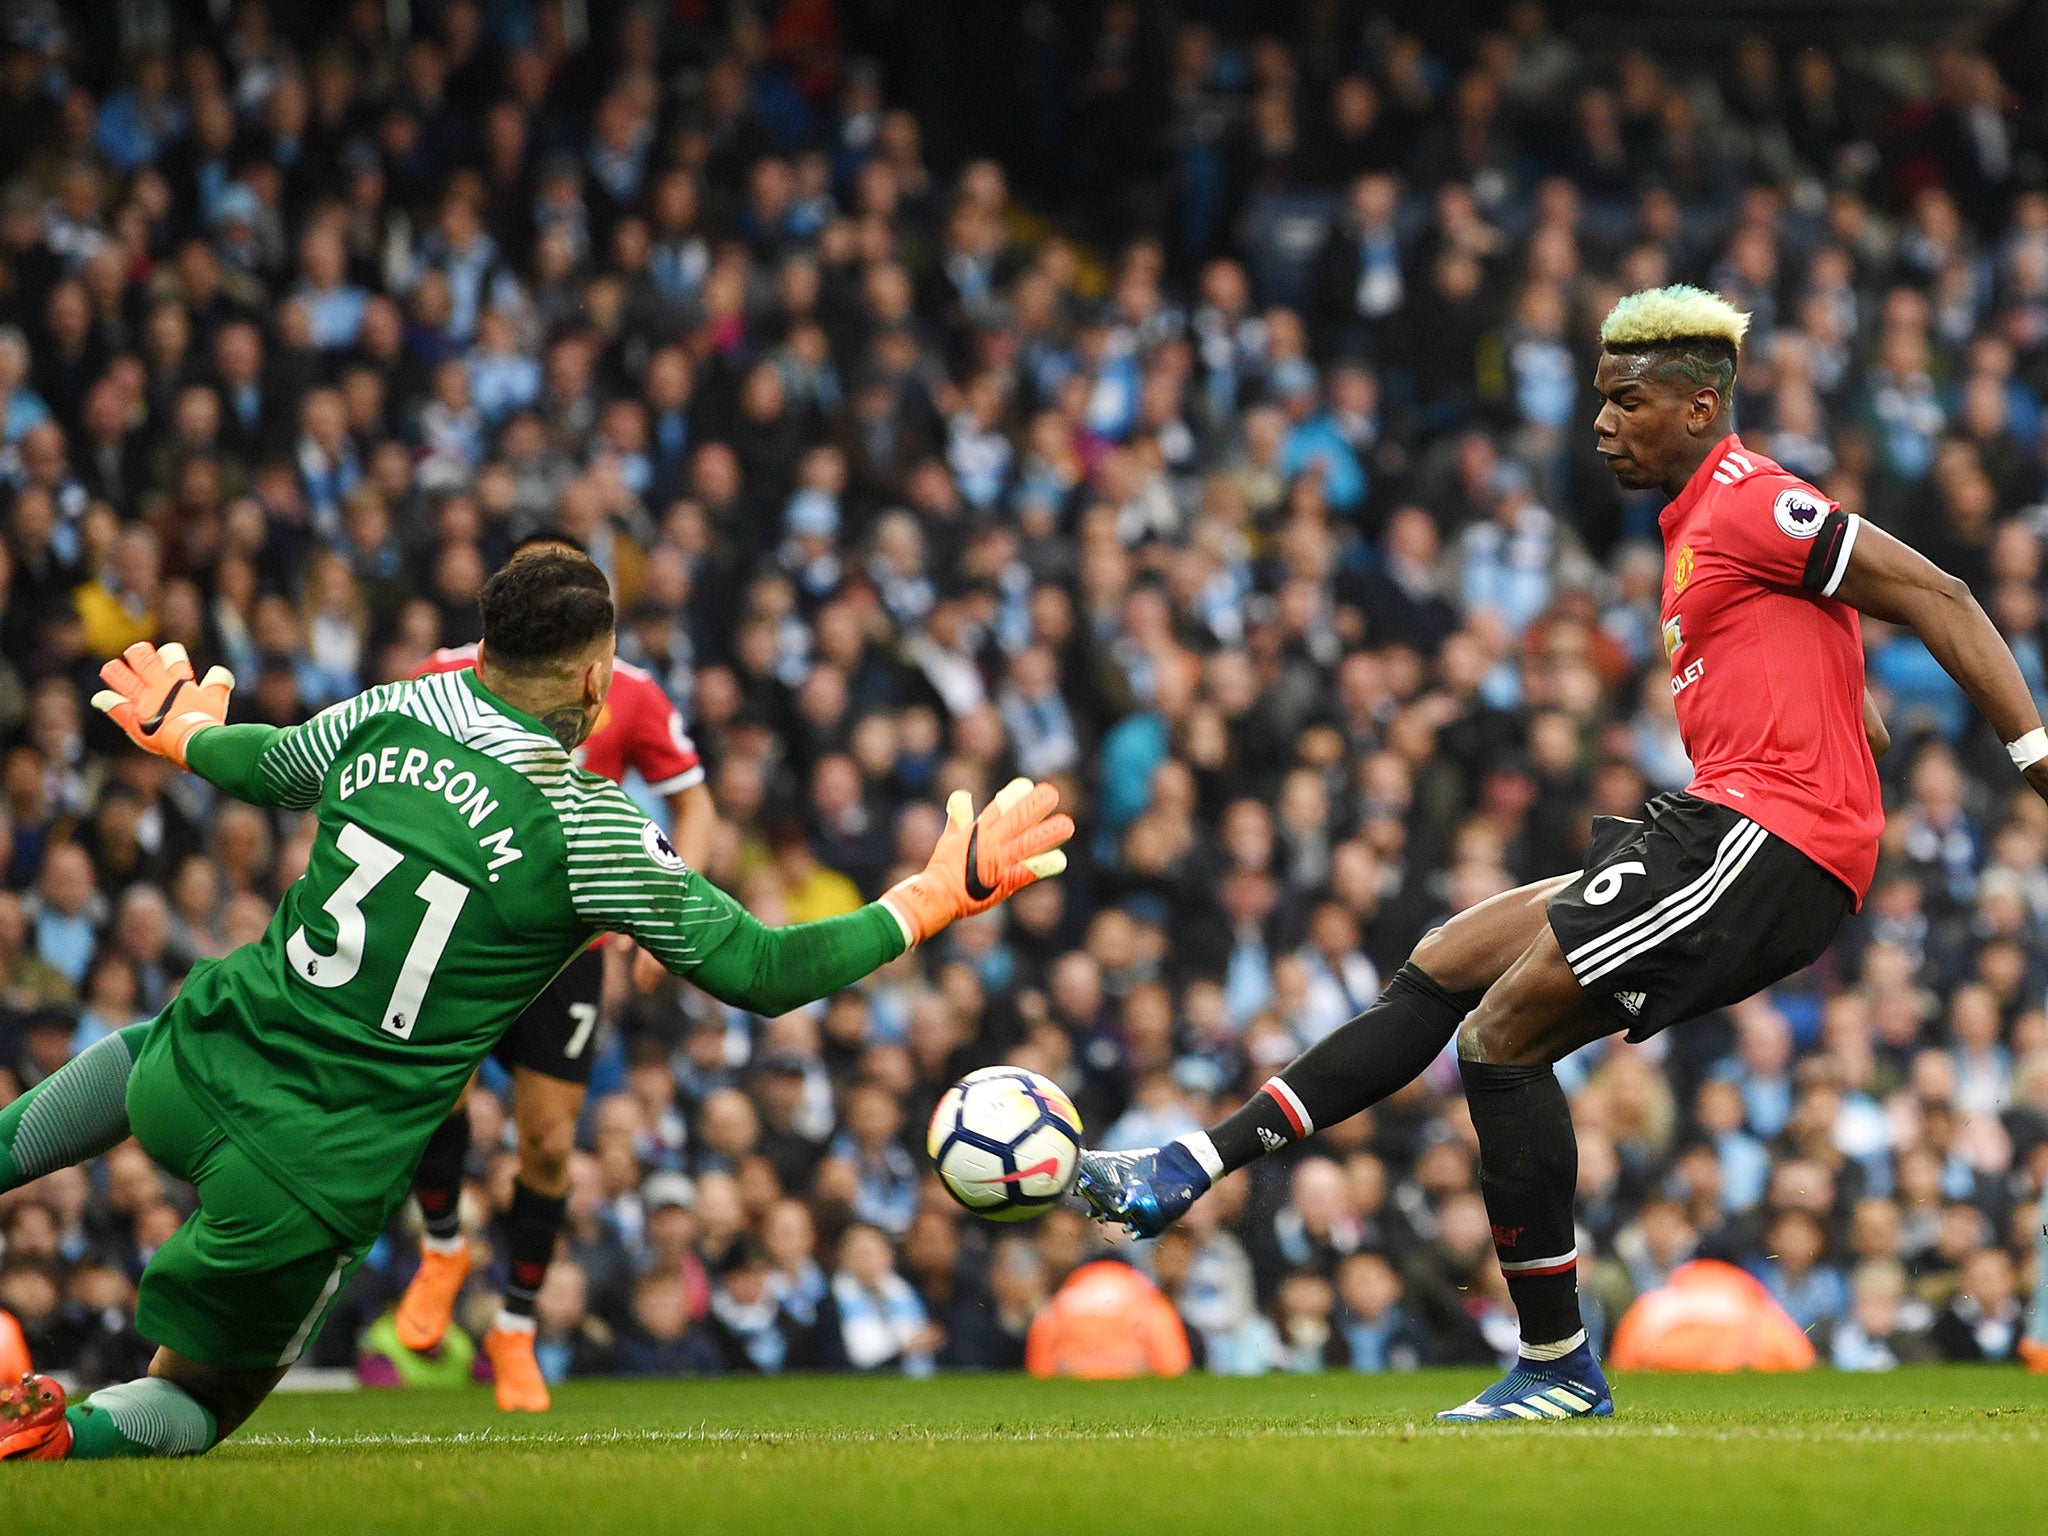 Manchester City vs Manchester United player ratings: Paul Pogba and Alexis Sanchez shine in second-half comeback